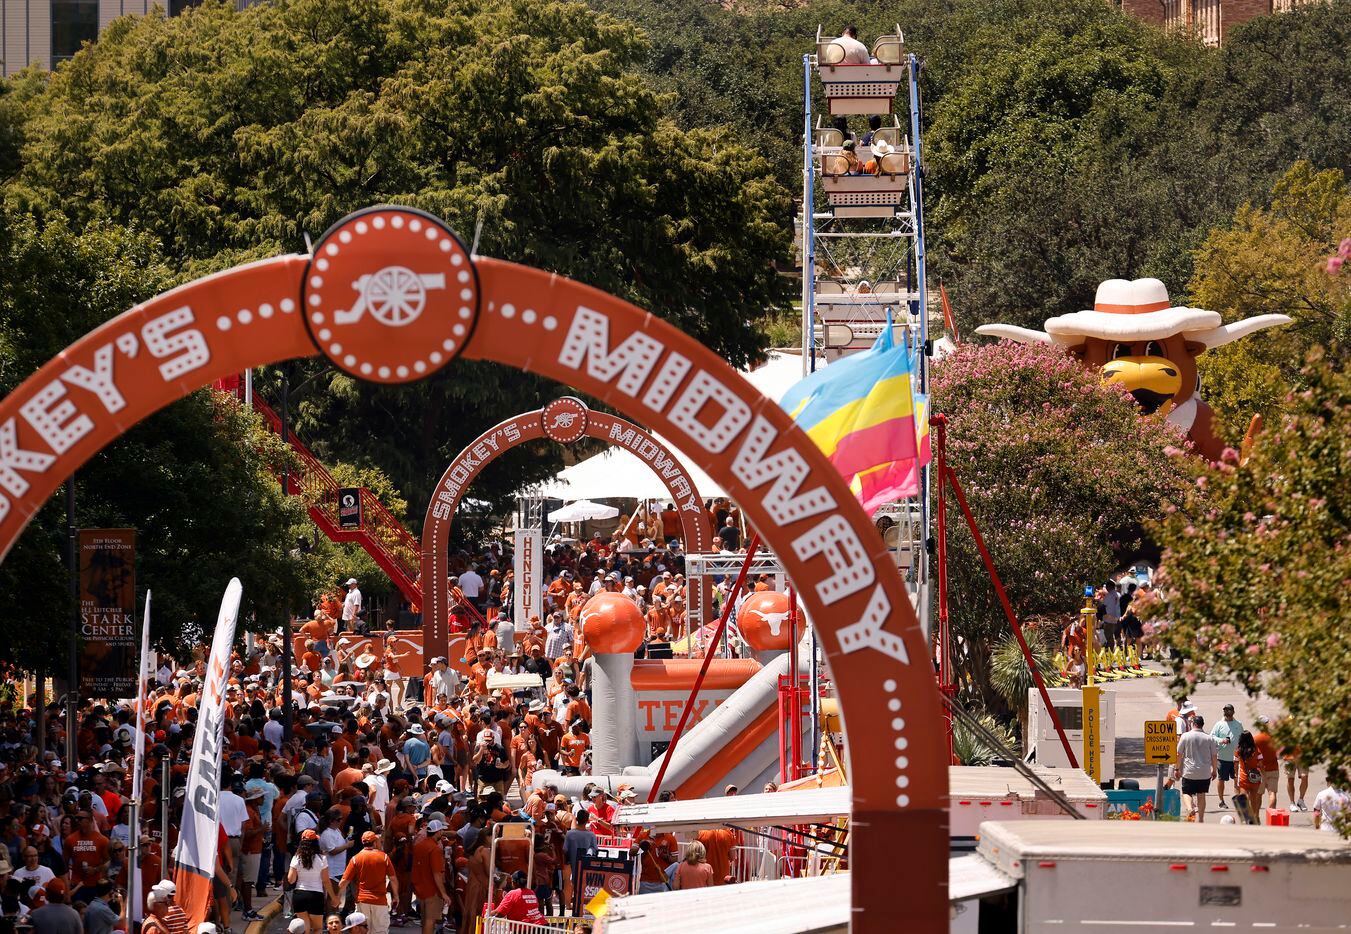 Fans fill Smokey's Midway and ride the ferris wheel outside of DKR-Texas Memorial Stadium in Austin, Saturday, September 4, 2021. The Longhorns were facing the Louisiana-Lafayette Ragin Cajuns. (Tom Fox/The Dallas Morning News)